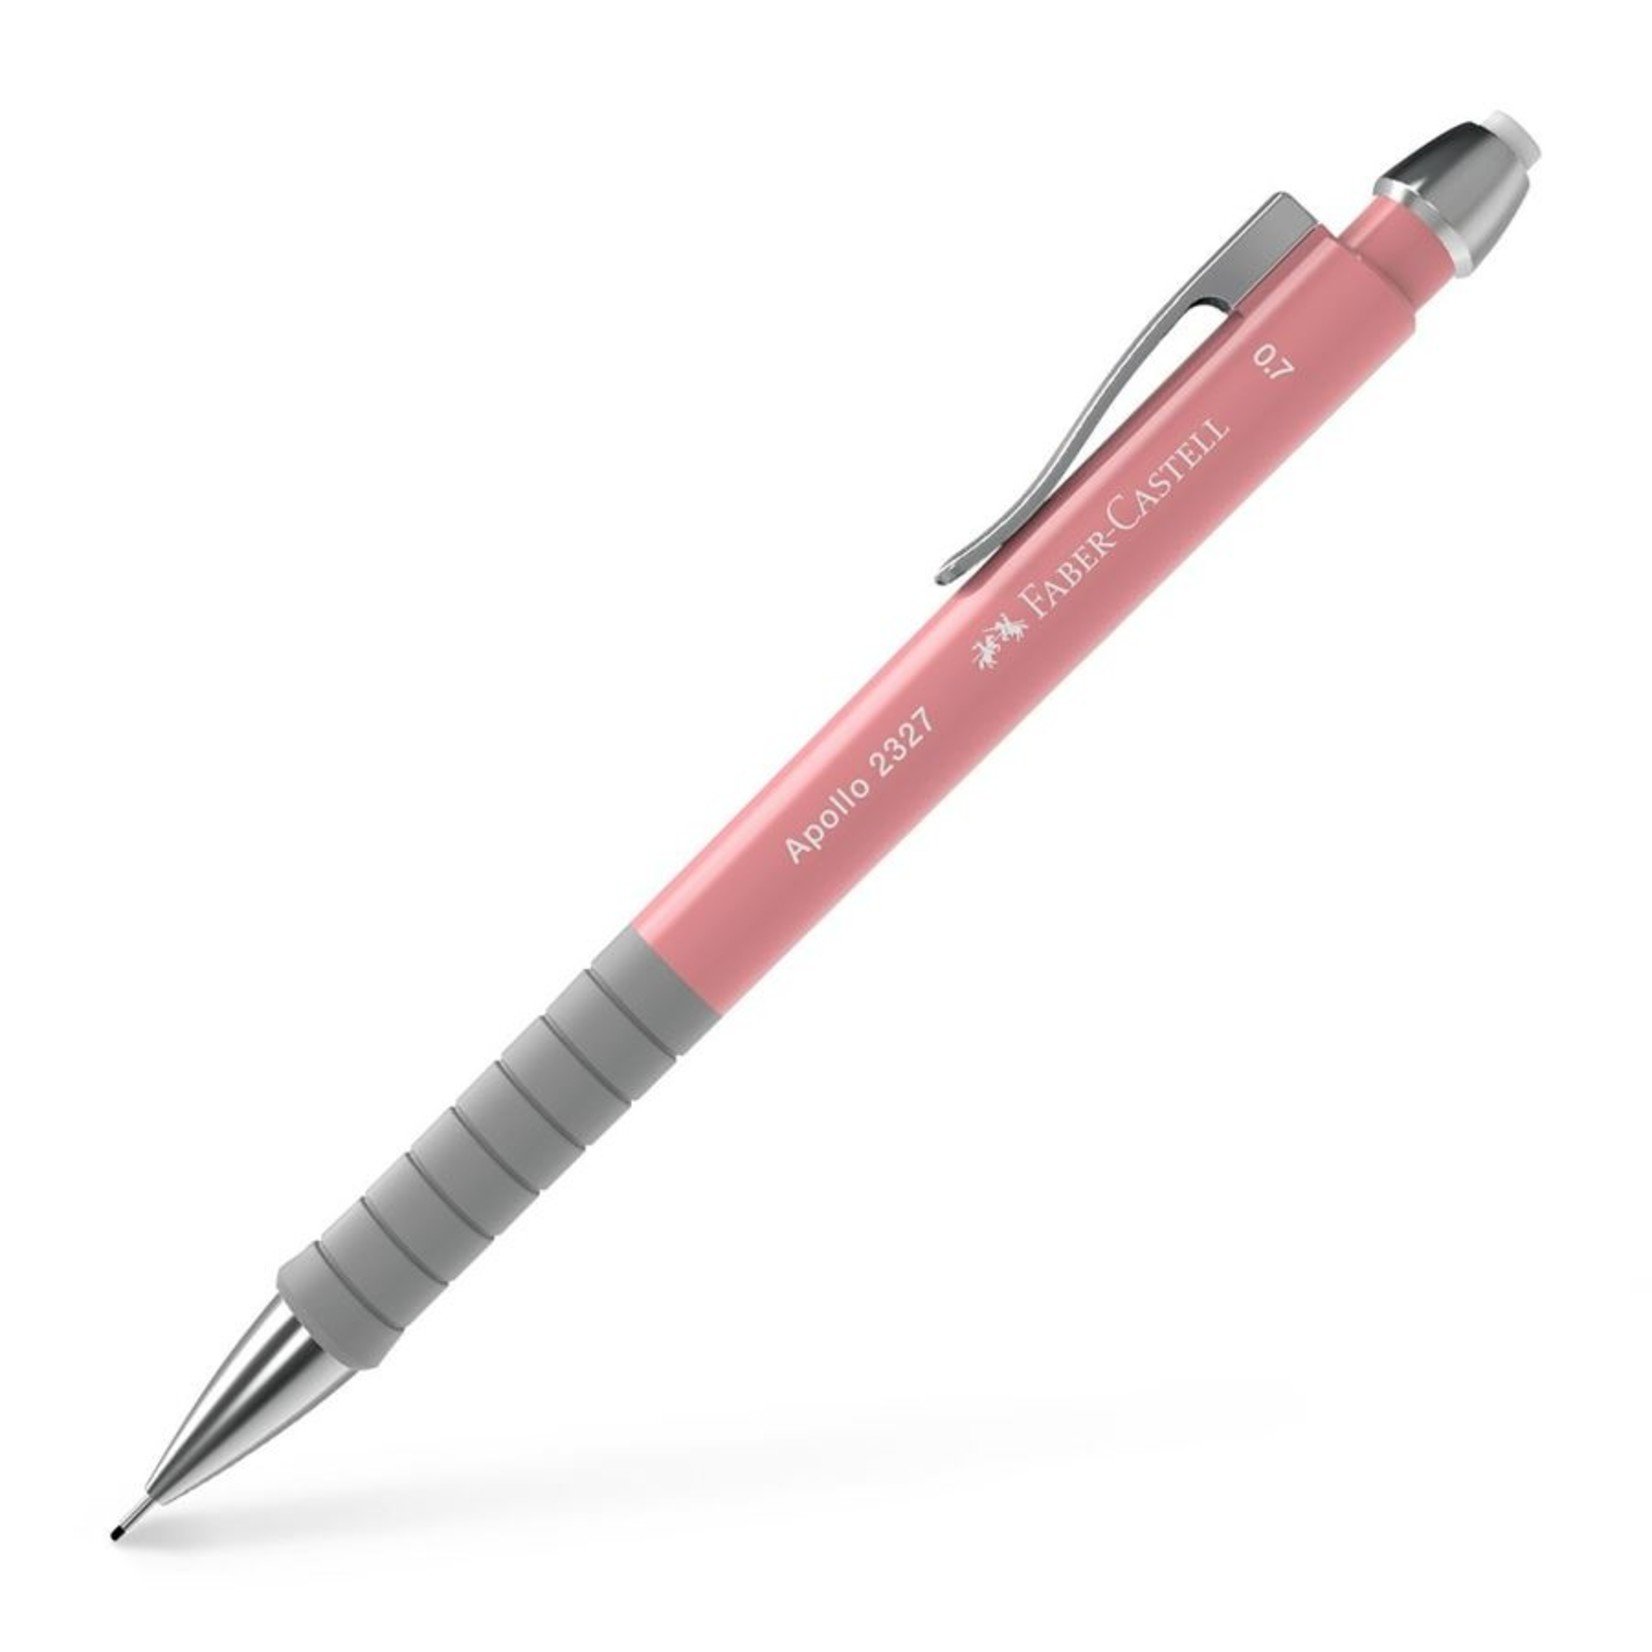 FABER CASTELL APOLLO MECHANICAL PENCIL 0.7MM ROSE